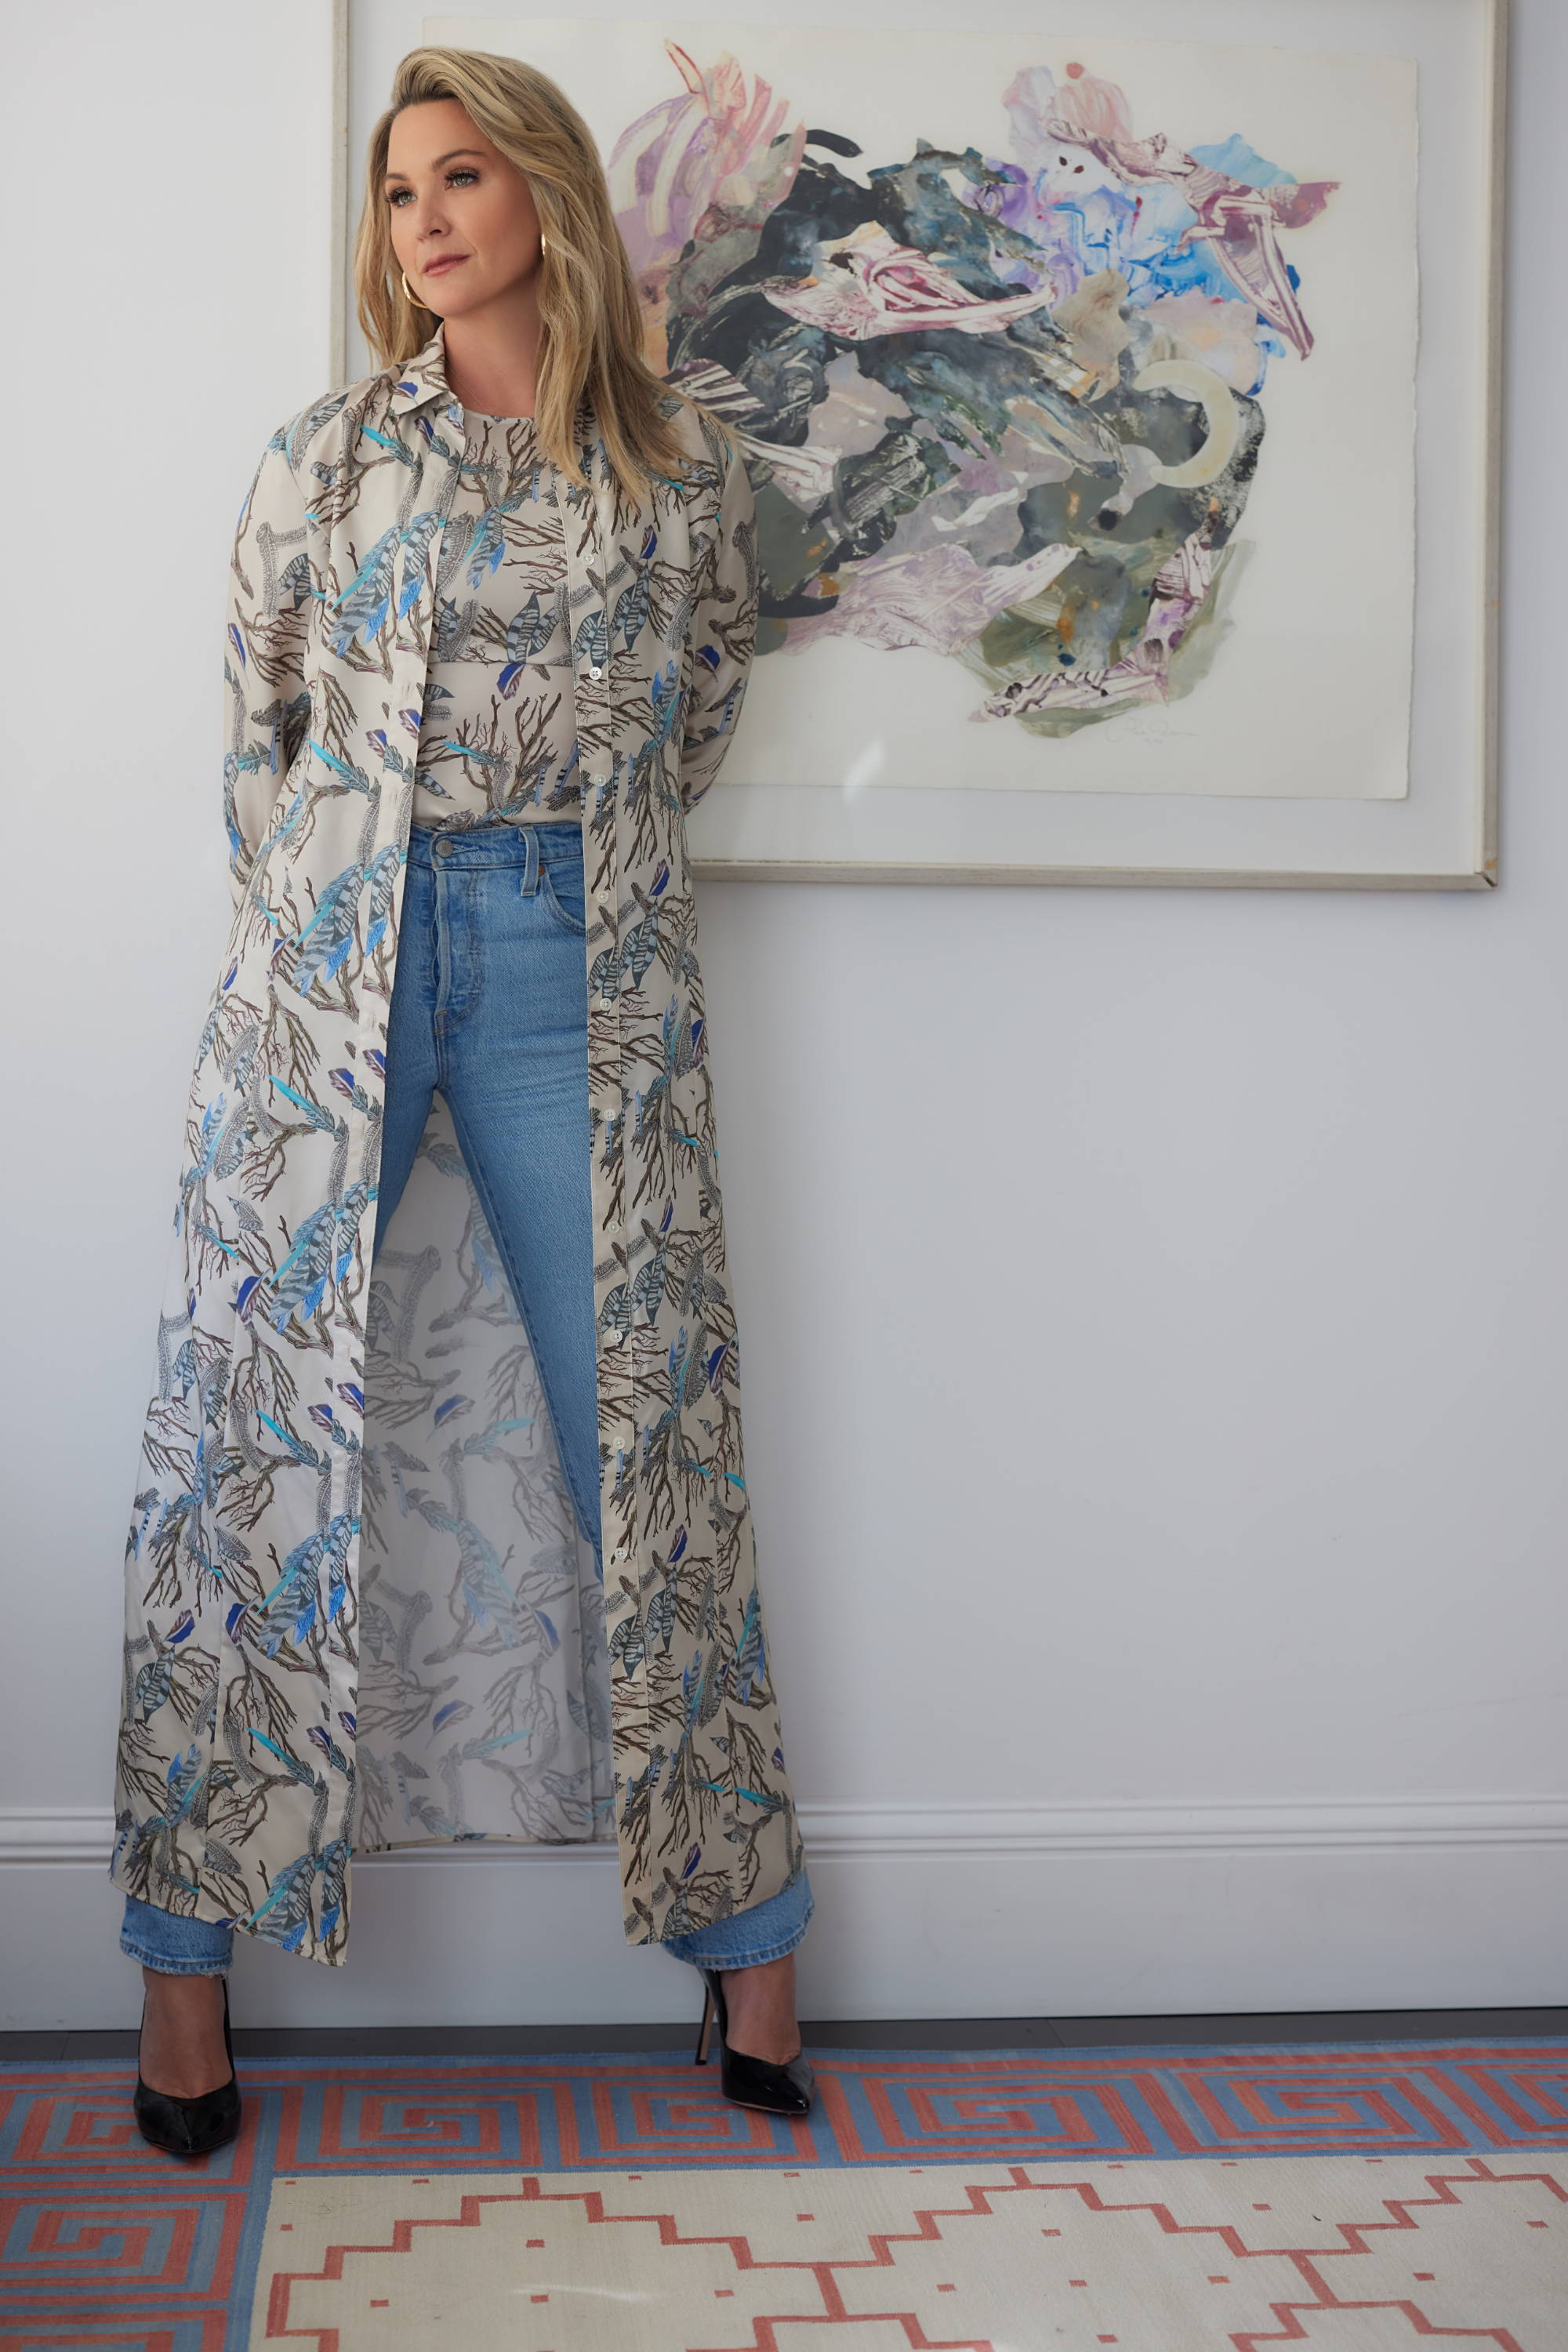 Sunny wearing silk feather printed shell tank with long silk feather printed shirt dress and jeans in New York City by Ala von Auersperg